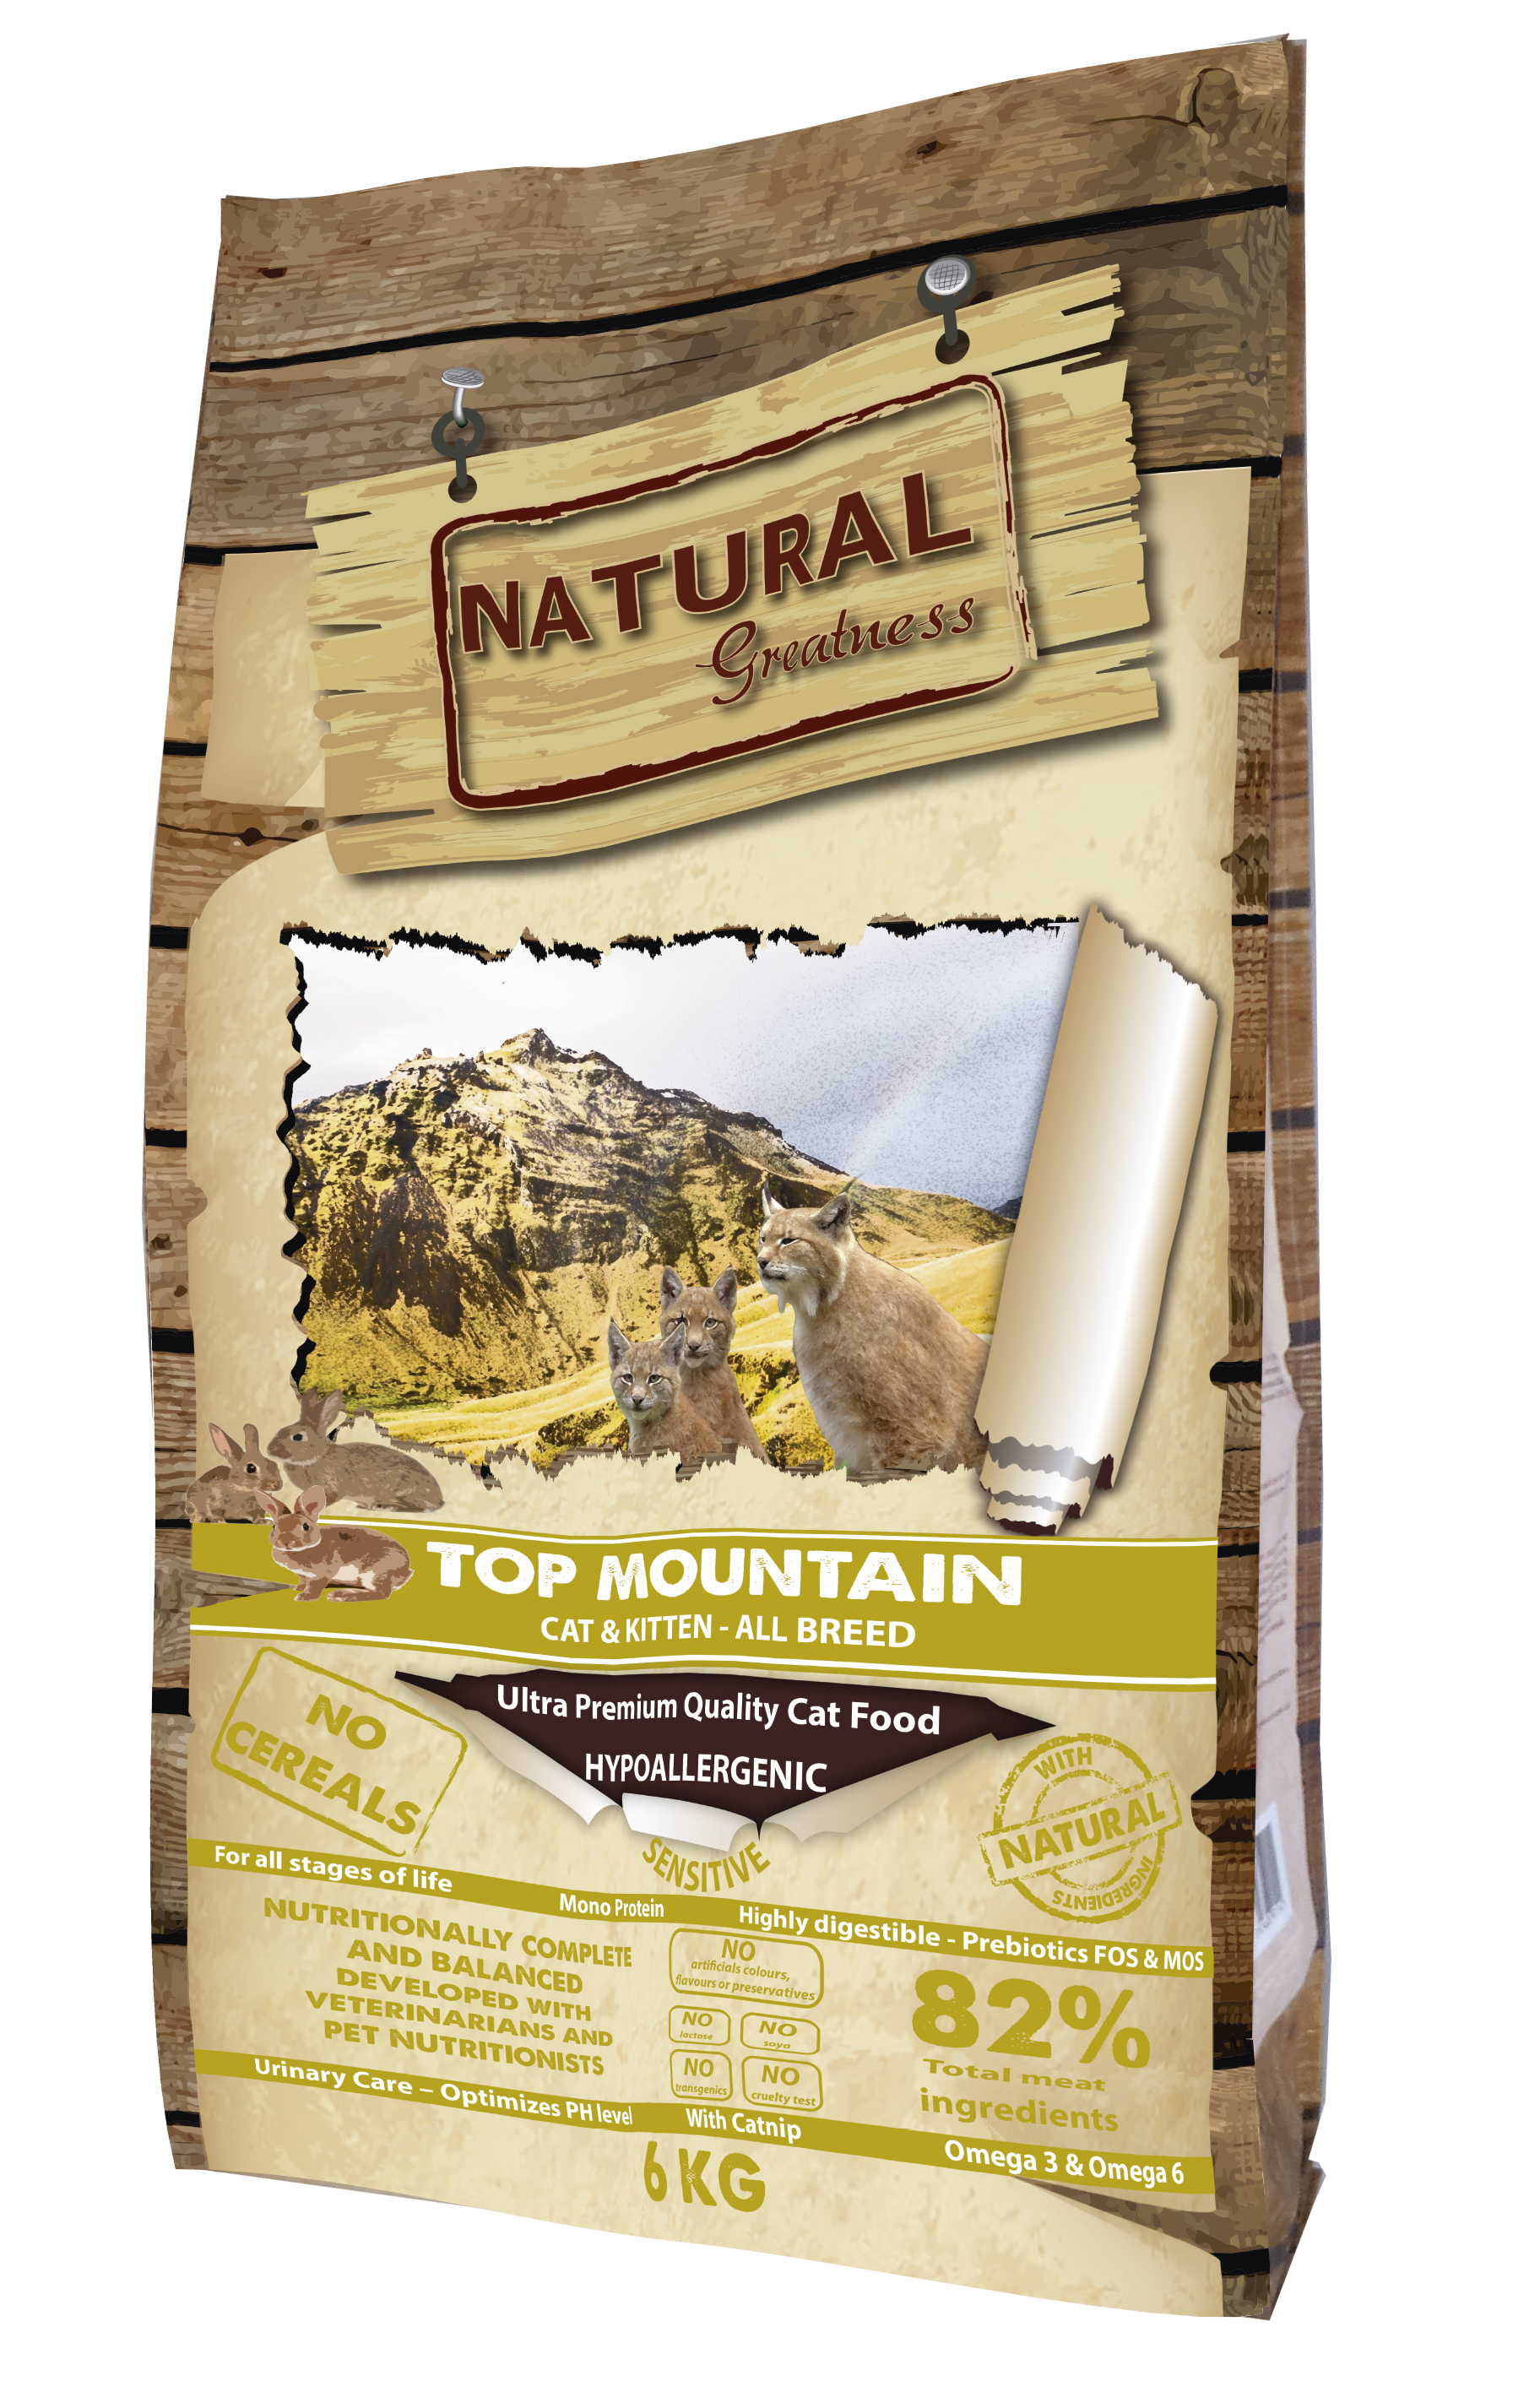 Natural Greatness Cat Top Mountain 6 kg - Chrysdietetic